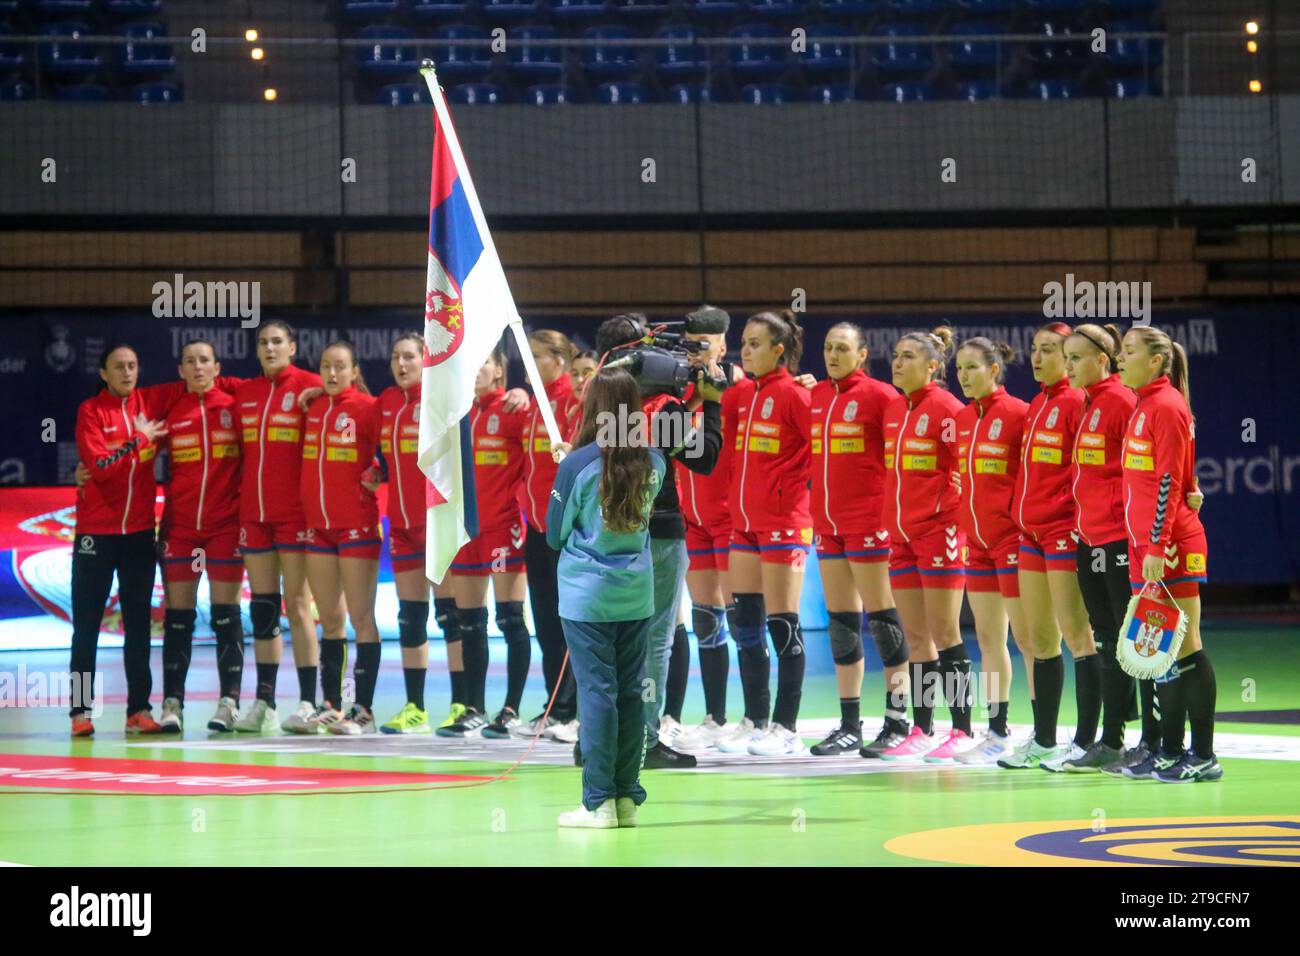 Santander, Spain, November 24, 2023: The Serbian team listening to the anthem during the 1st Matchday of the 2023 Spanish Women's International Tournament between Argentina and Serbia, on November 24, 2023, at the Santander Sports Palace, in Santander, Spain . Credit: Alberto Brevers / Alamy Live News. Stock Photo